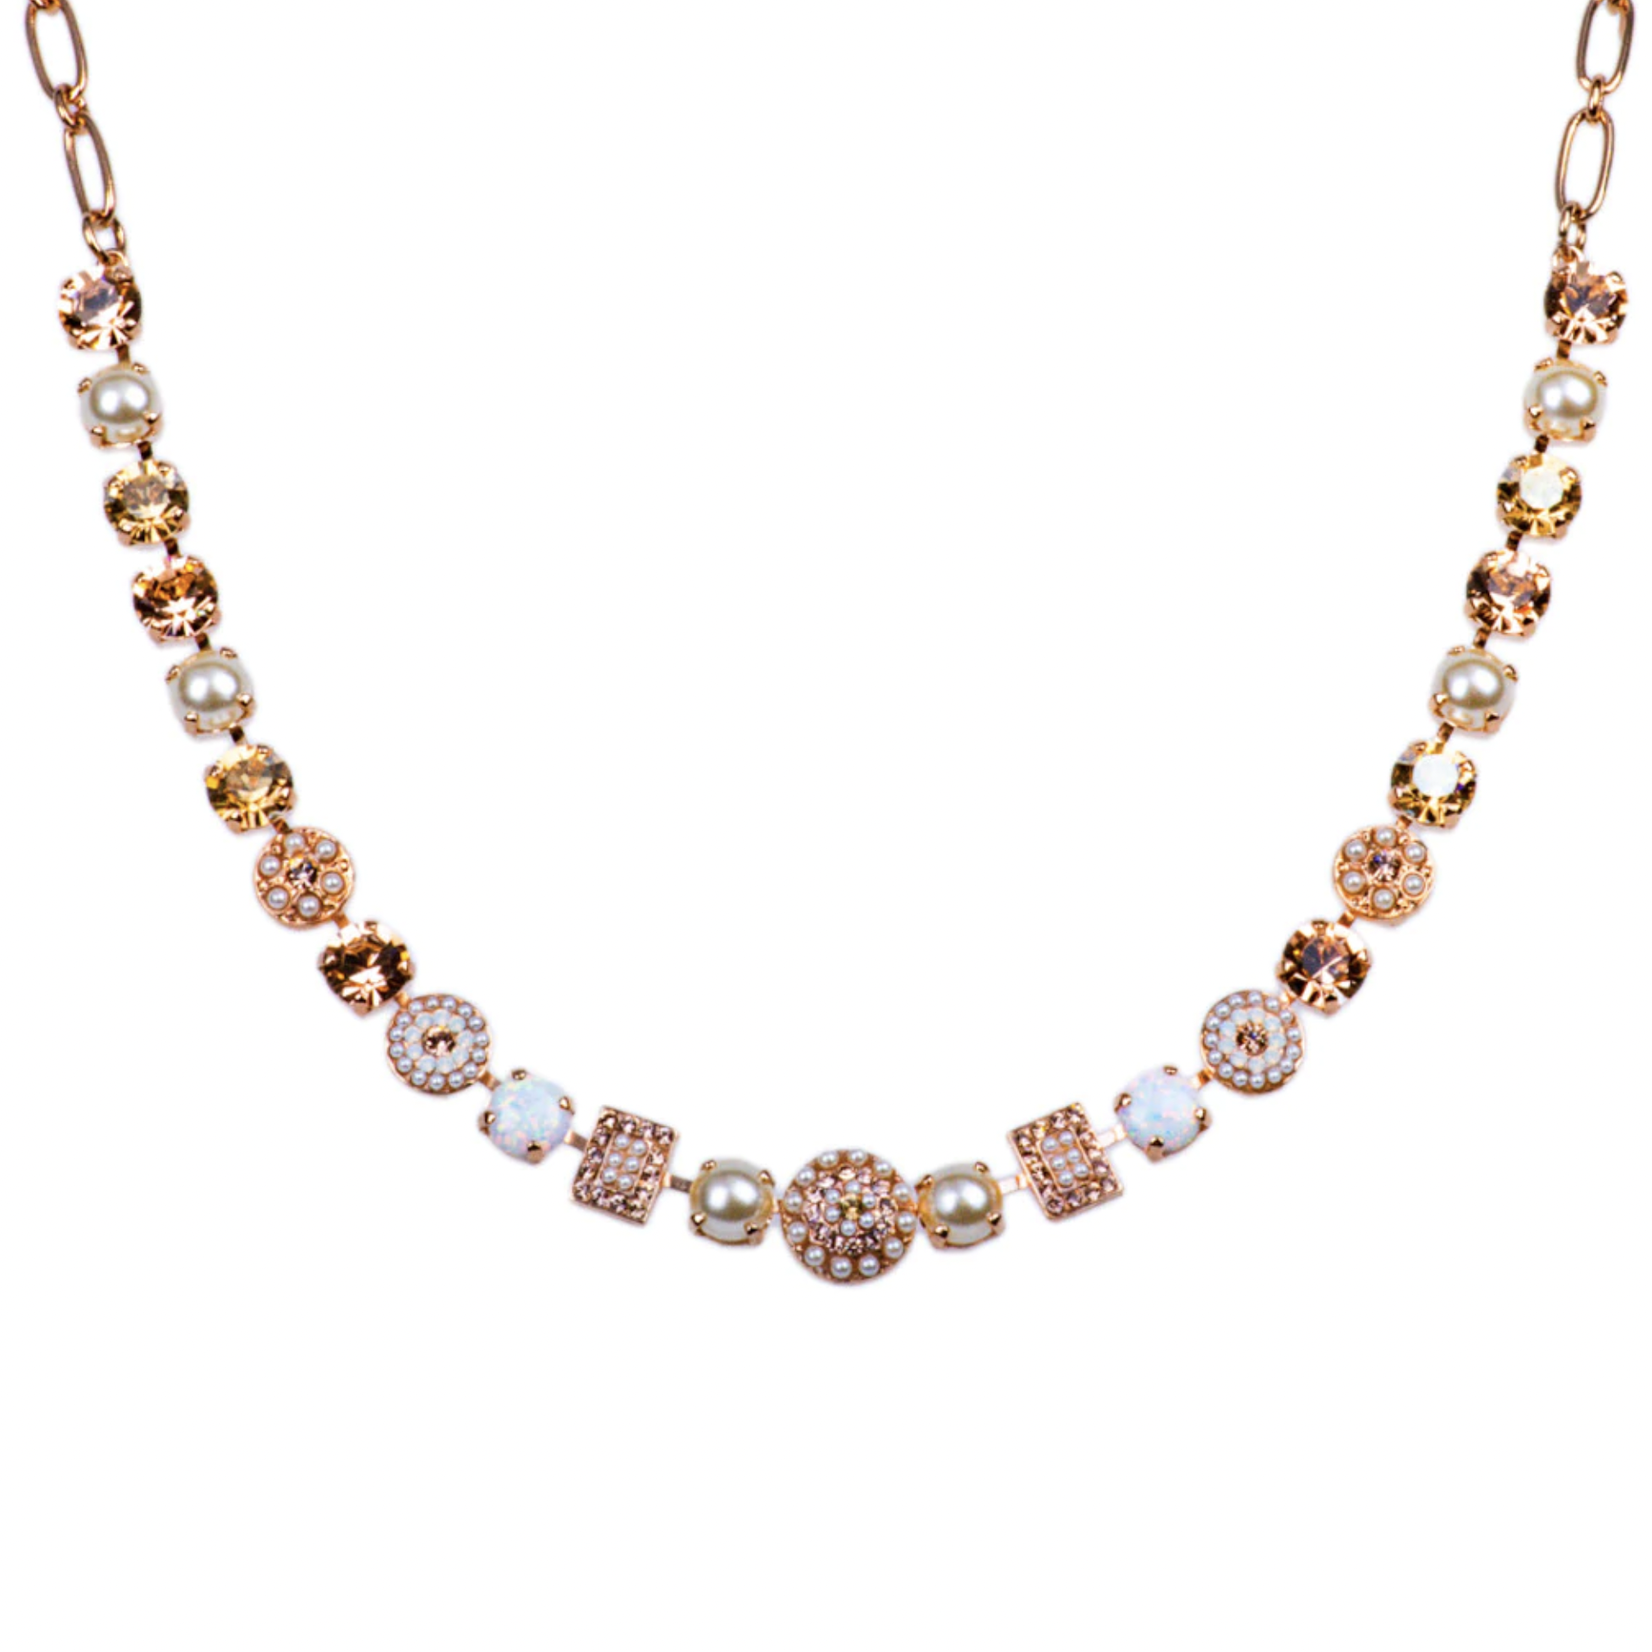 Mariana Must-Have Cluster and Pavé Necklace in "Cookie Dough" Rose Gold